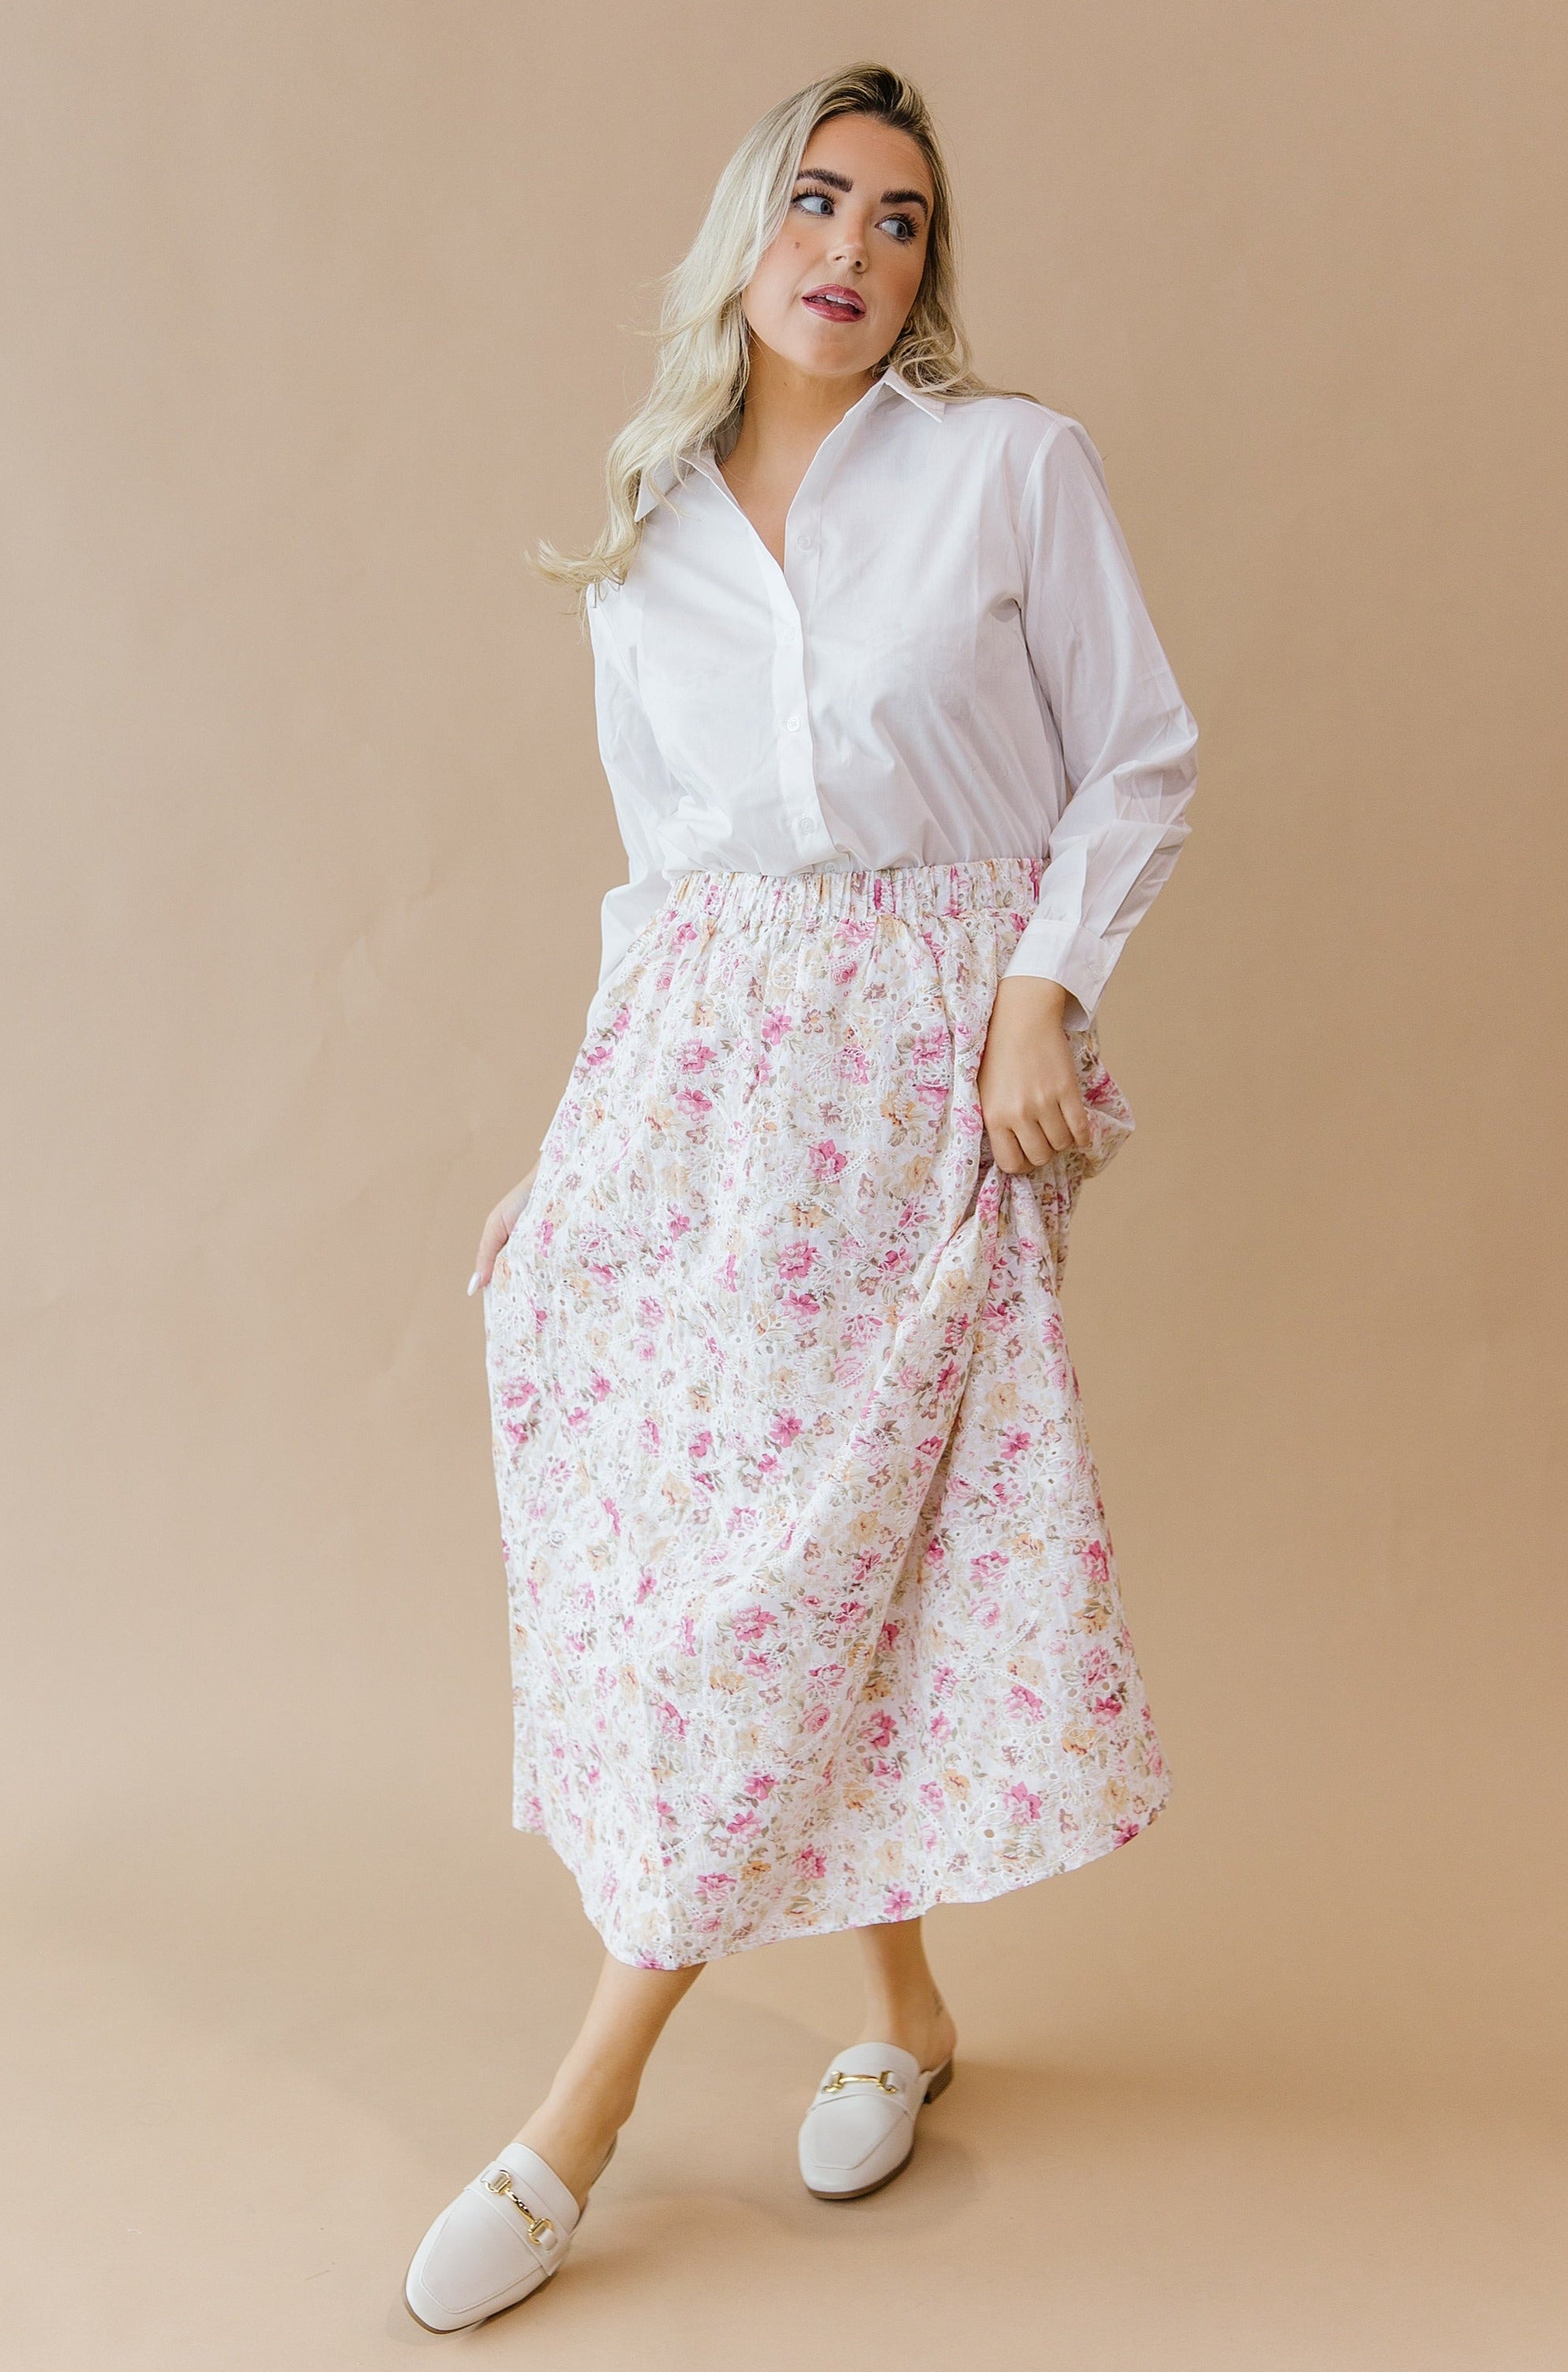 The Fleur Skirt – The Stockplace